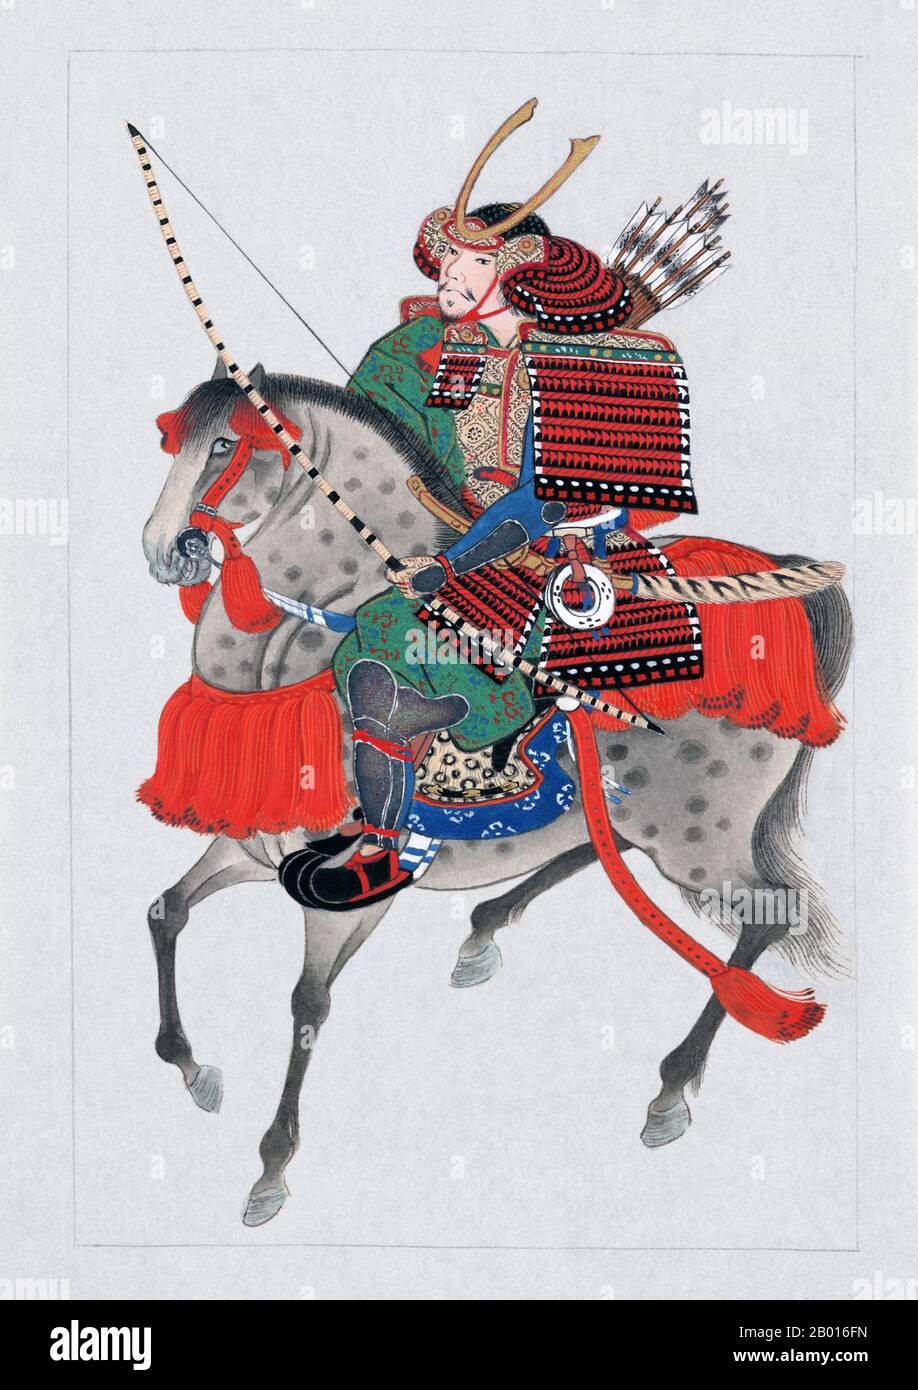 Japan: 'Samurai on Horseback'. Ink painting, c. 1878.  Samurai is the term for the military nobility of pre-industrial Japan. By the end of the 12th century, samurai became almost entirely synonymous with bushi, and the word was closely associated with the middle and upper echelons of the warrior class. The samurai followed a set of rules that came to be known as Bushidō. While they numbered less than ten percent of Japan's population, samurai teachings can still be found today in both everyday life and in martial arts such as Kendō, meaning the way of the sword. Stock Photo